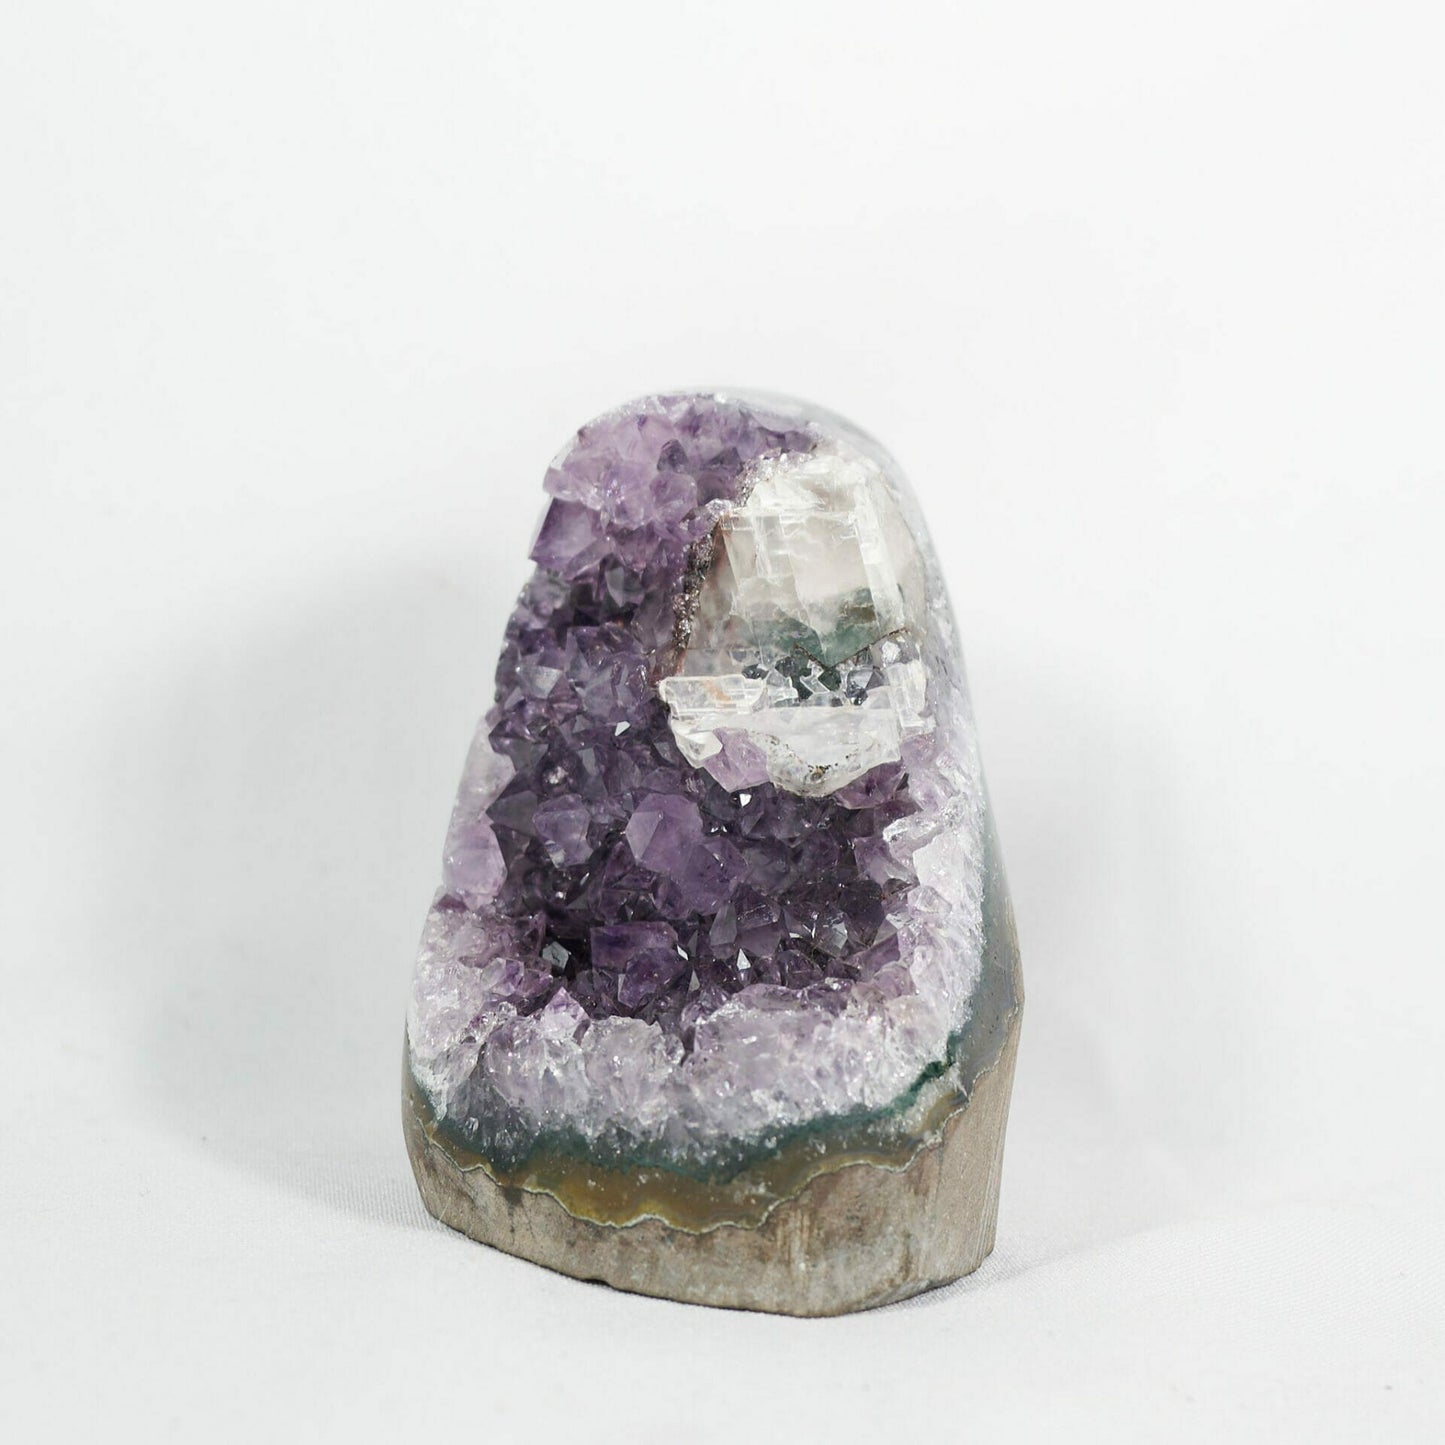 Exquisite amethyst base cluster with calcite and two generational drazy sugar front